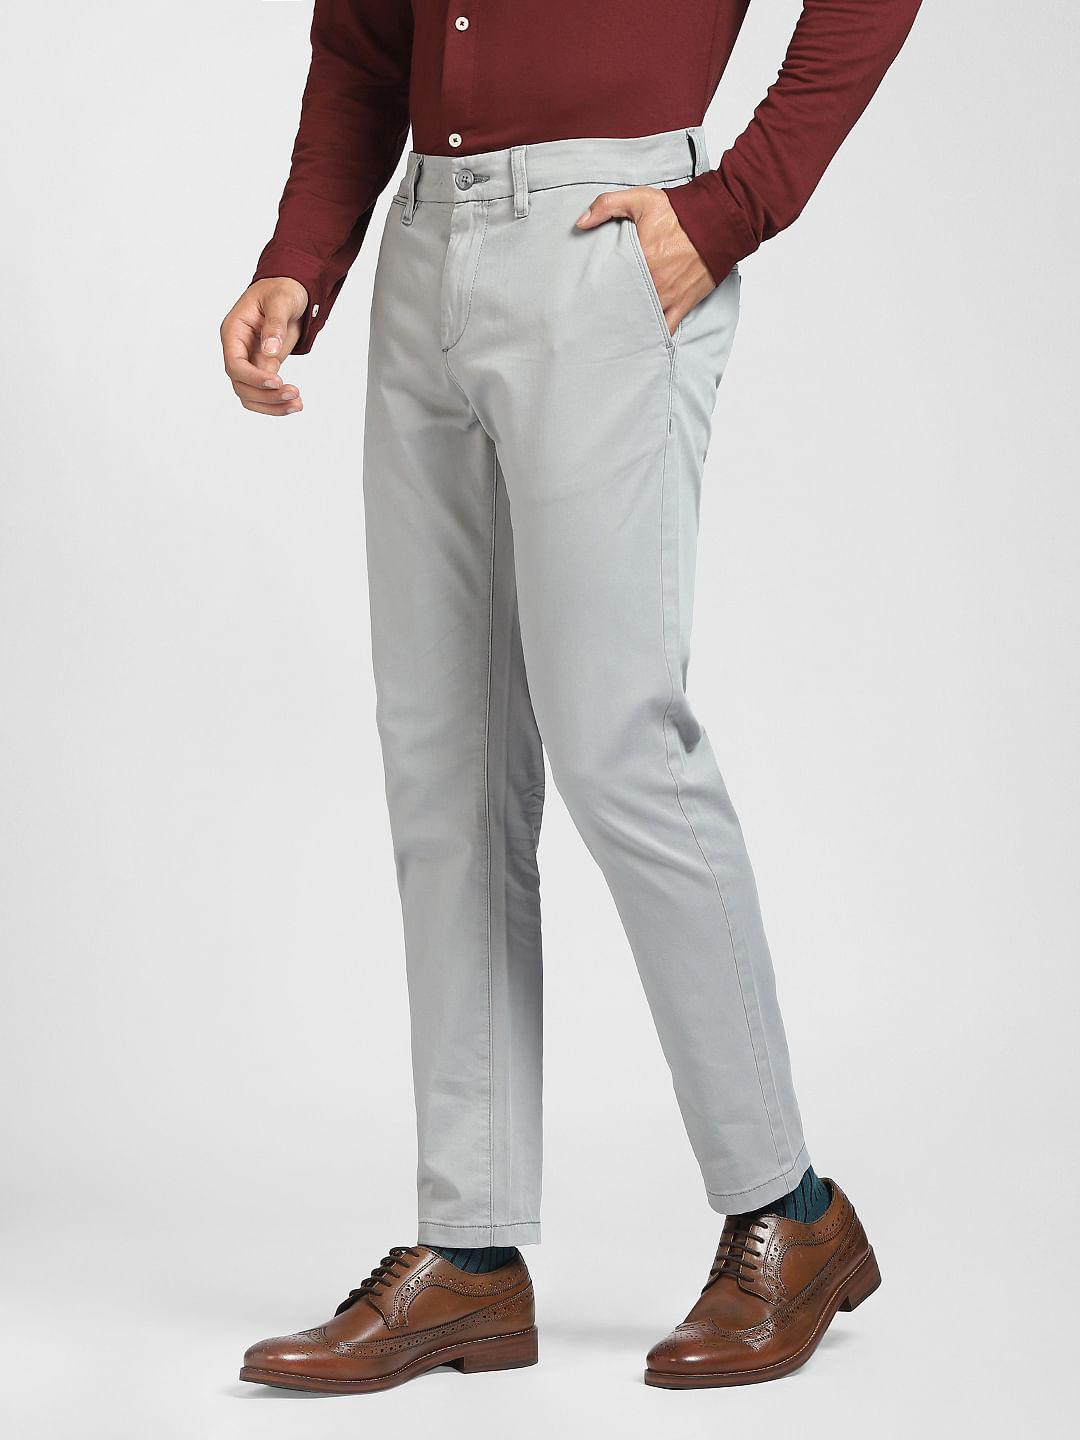 Buy Grey Trousers  Pants for Men by INDEPENDENCE Online  Ajiocom